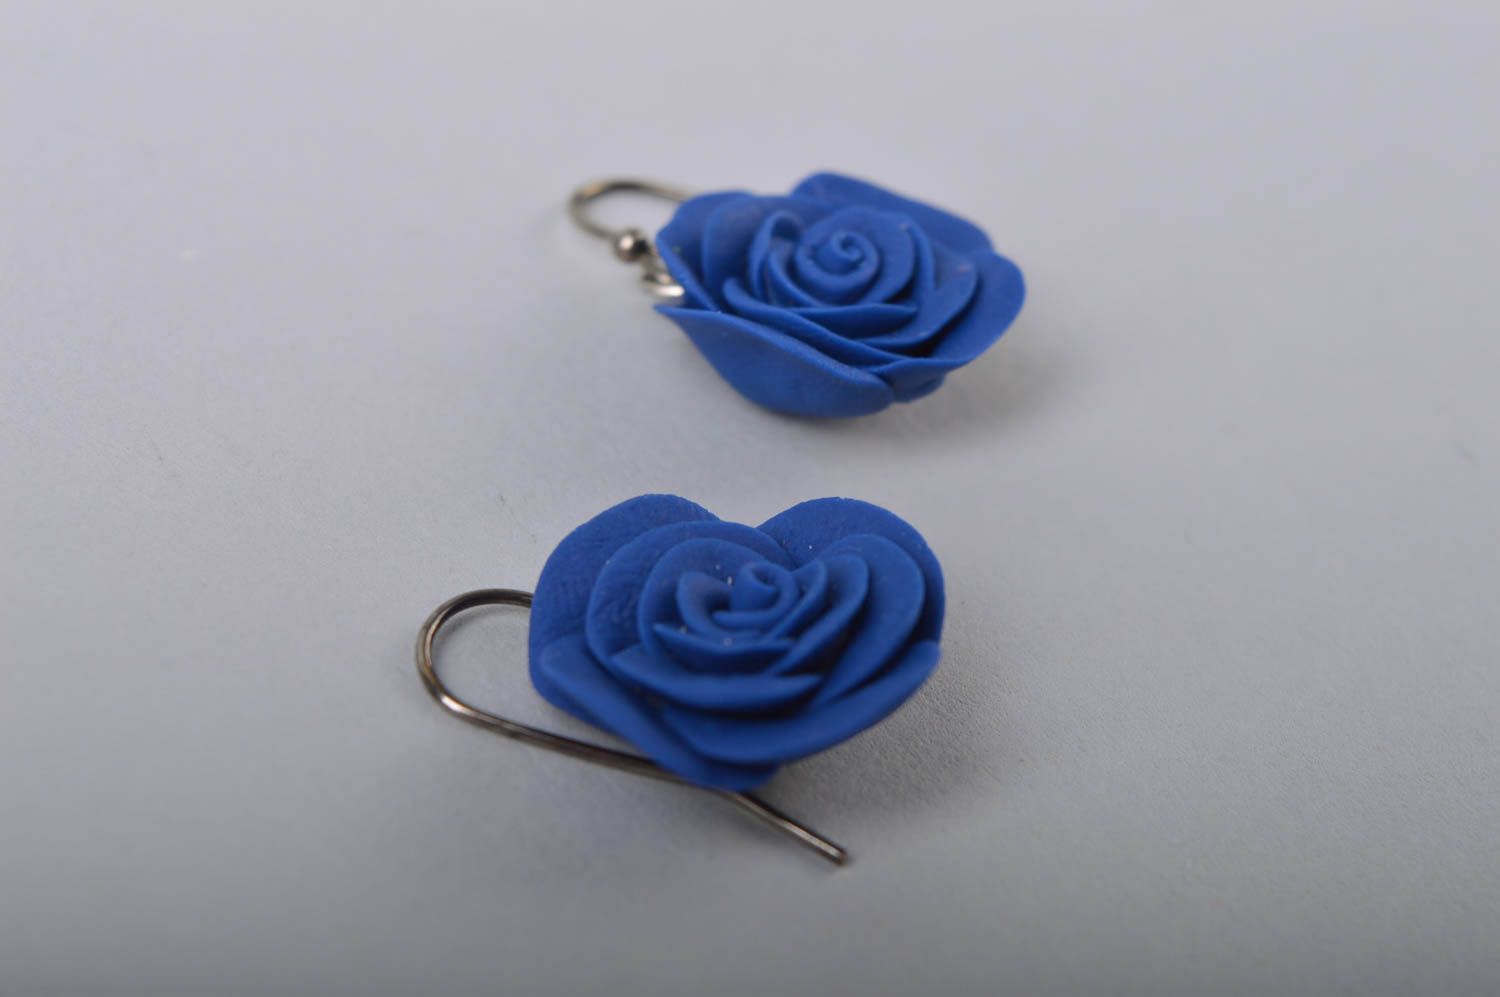 Handmade beautiful moulded earrings made of cold porcelain in shape of roses photo 5